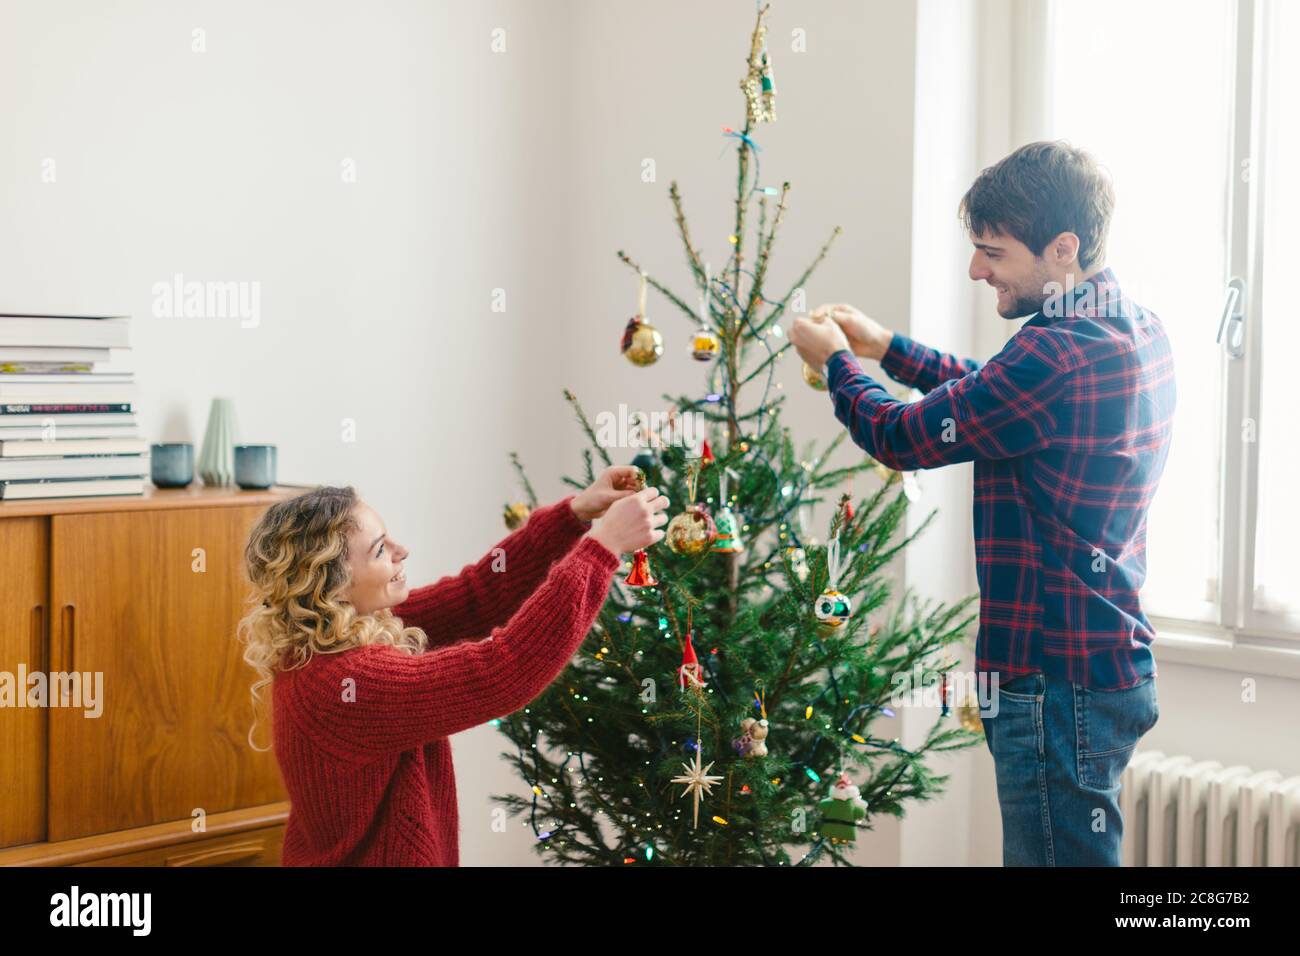 Couple decorating Christmas tree at home Stock Photo